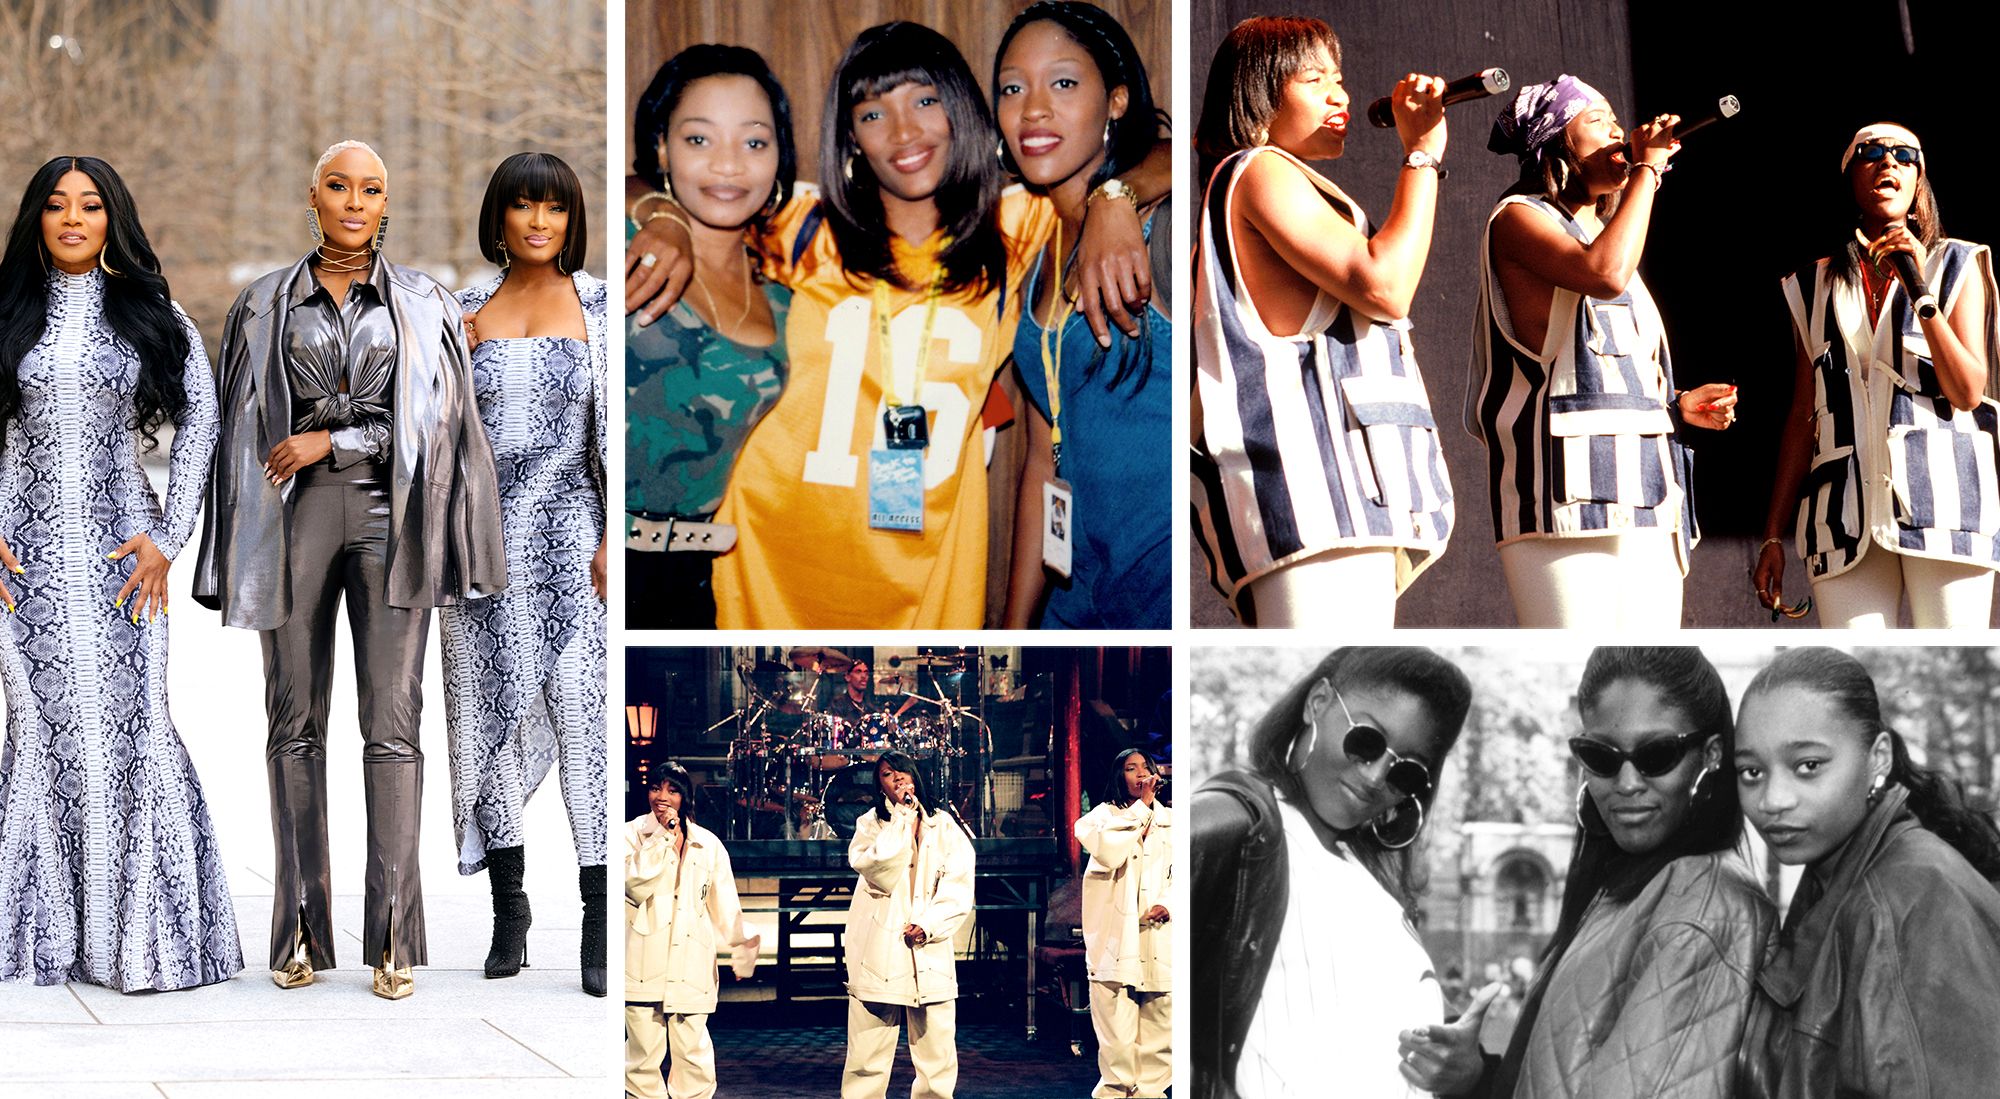 Hip-Hop Fashion Pioneers Reminisce About Clothes That Shaped the